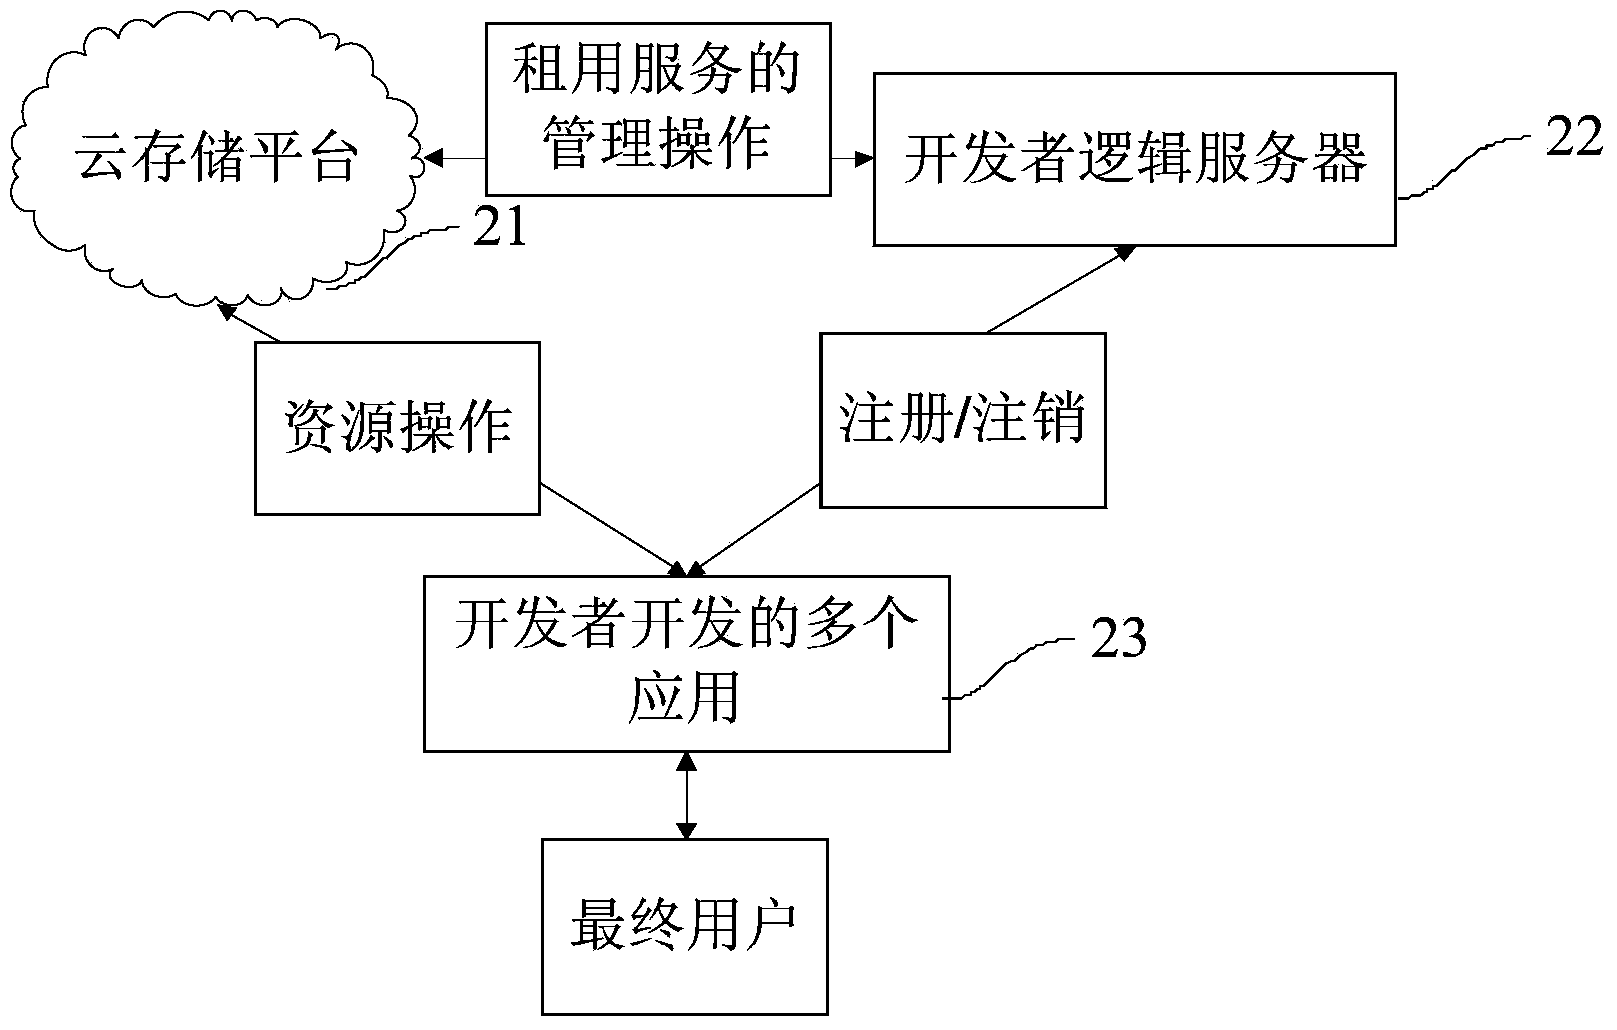 Lightweight application development cloud service platform and method for having access to resources thereof